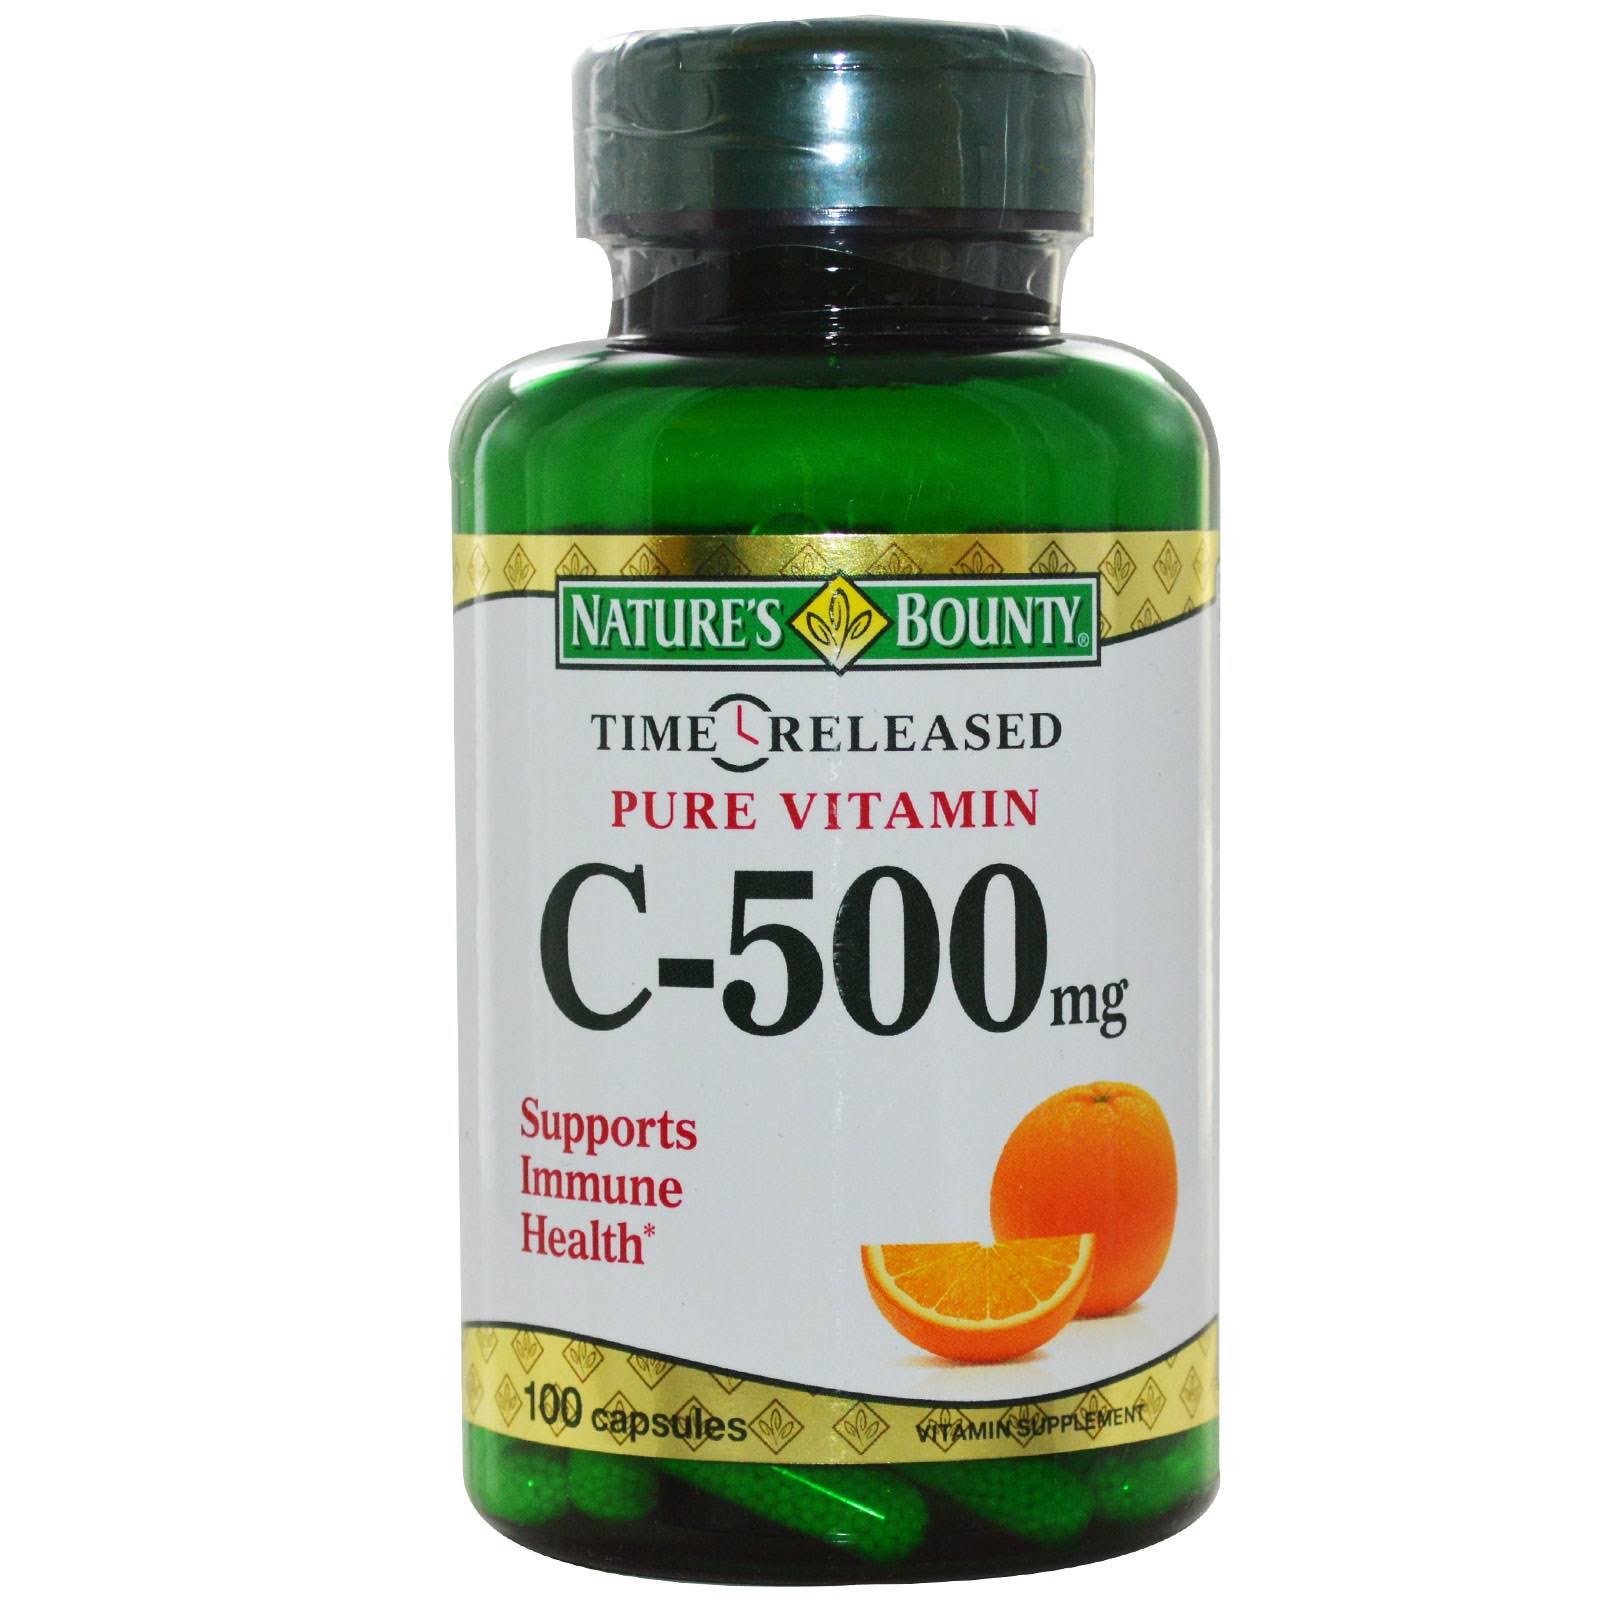 Nature's Bounty Time Release Vitamin C 500mg - 100 Capsules